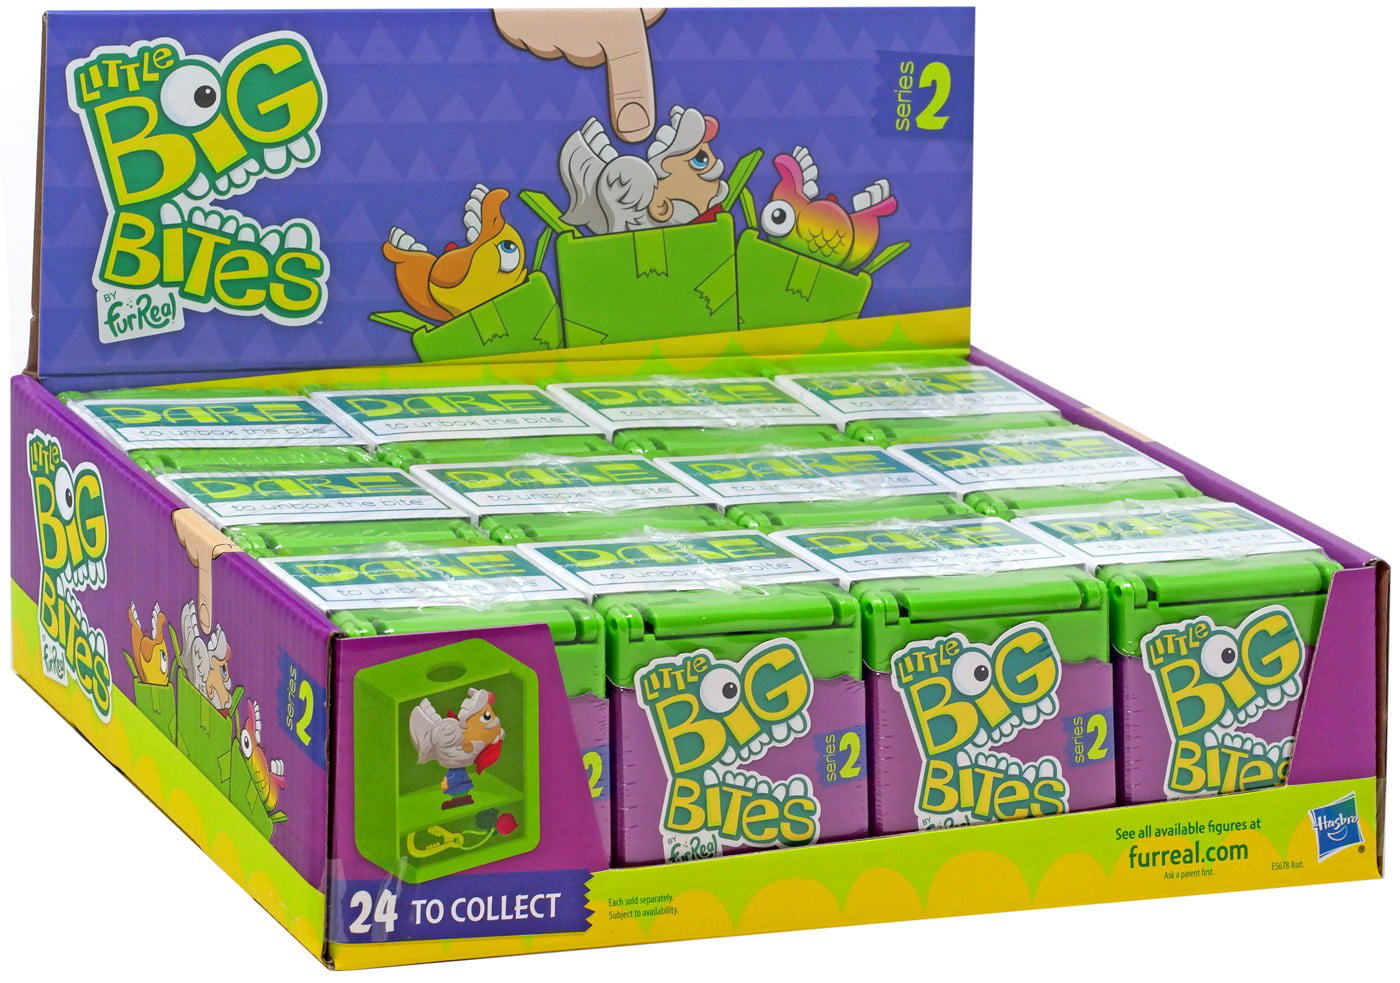 Little Big Bites Series 2 Green Box Dare Blind Boxes Lot Of 12 Brand New 